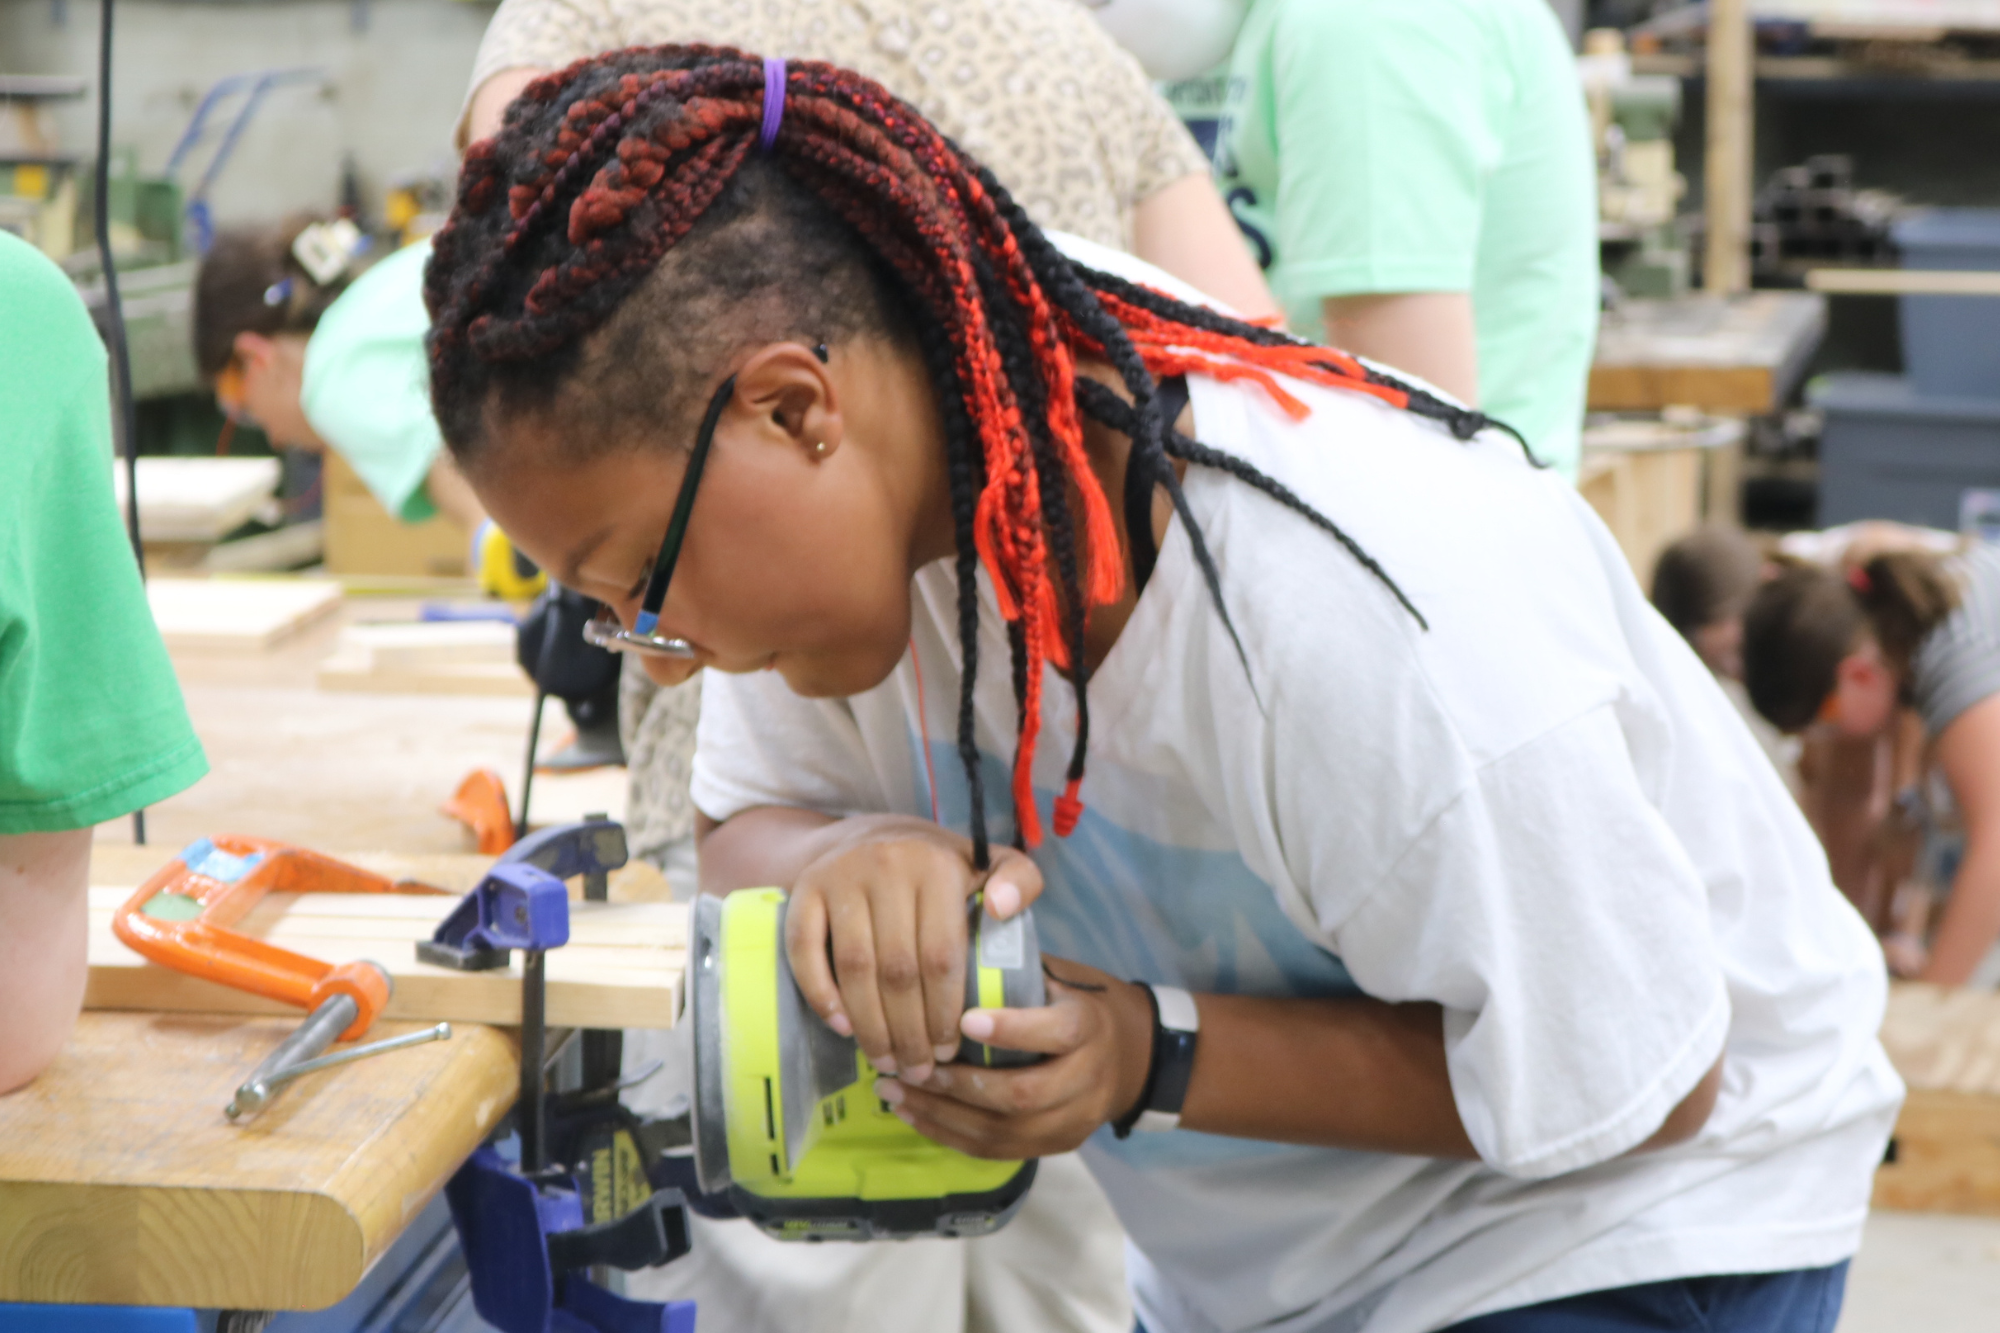 A middle school student uses a sander at Rosie's Girls summer camp.